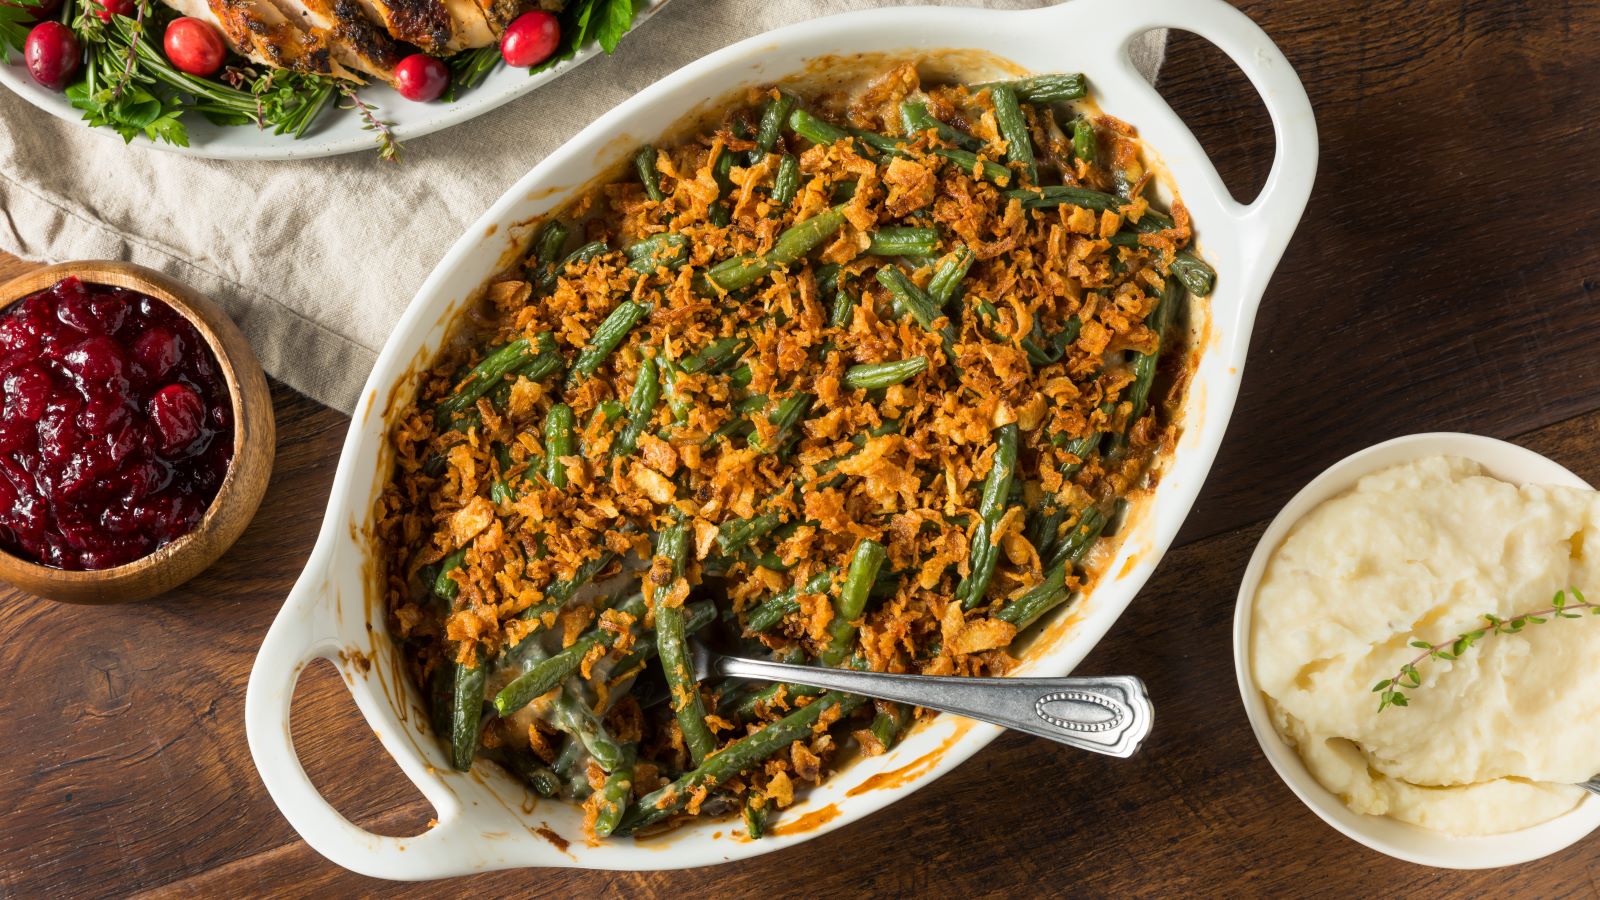 Should you stick to the traditional green bean casserole recipe on Thanksgiving? Or find new ways to add nutritional value to the dish?